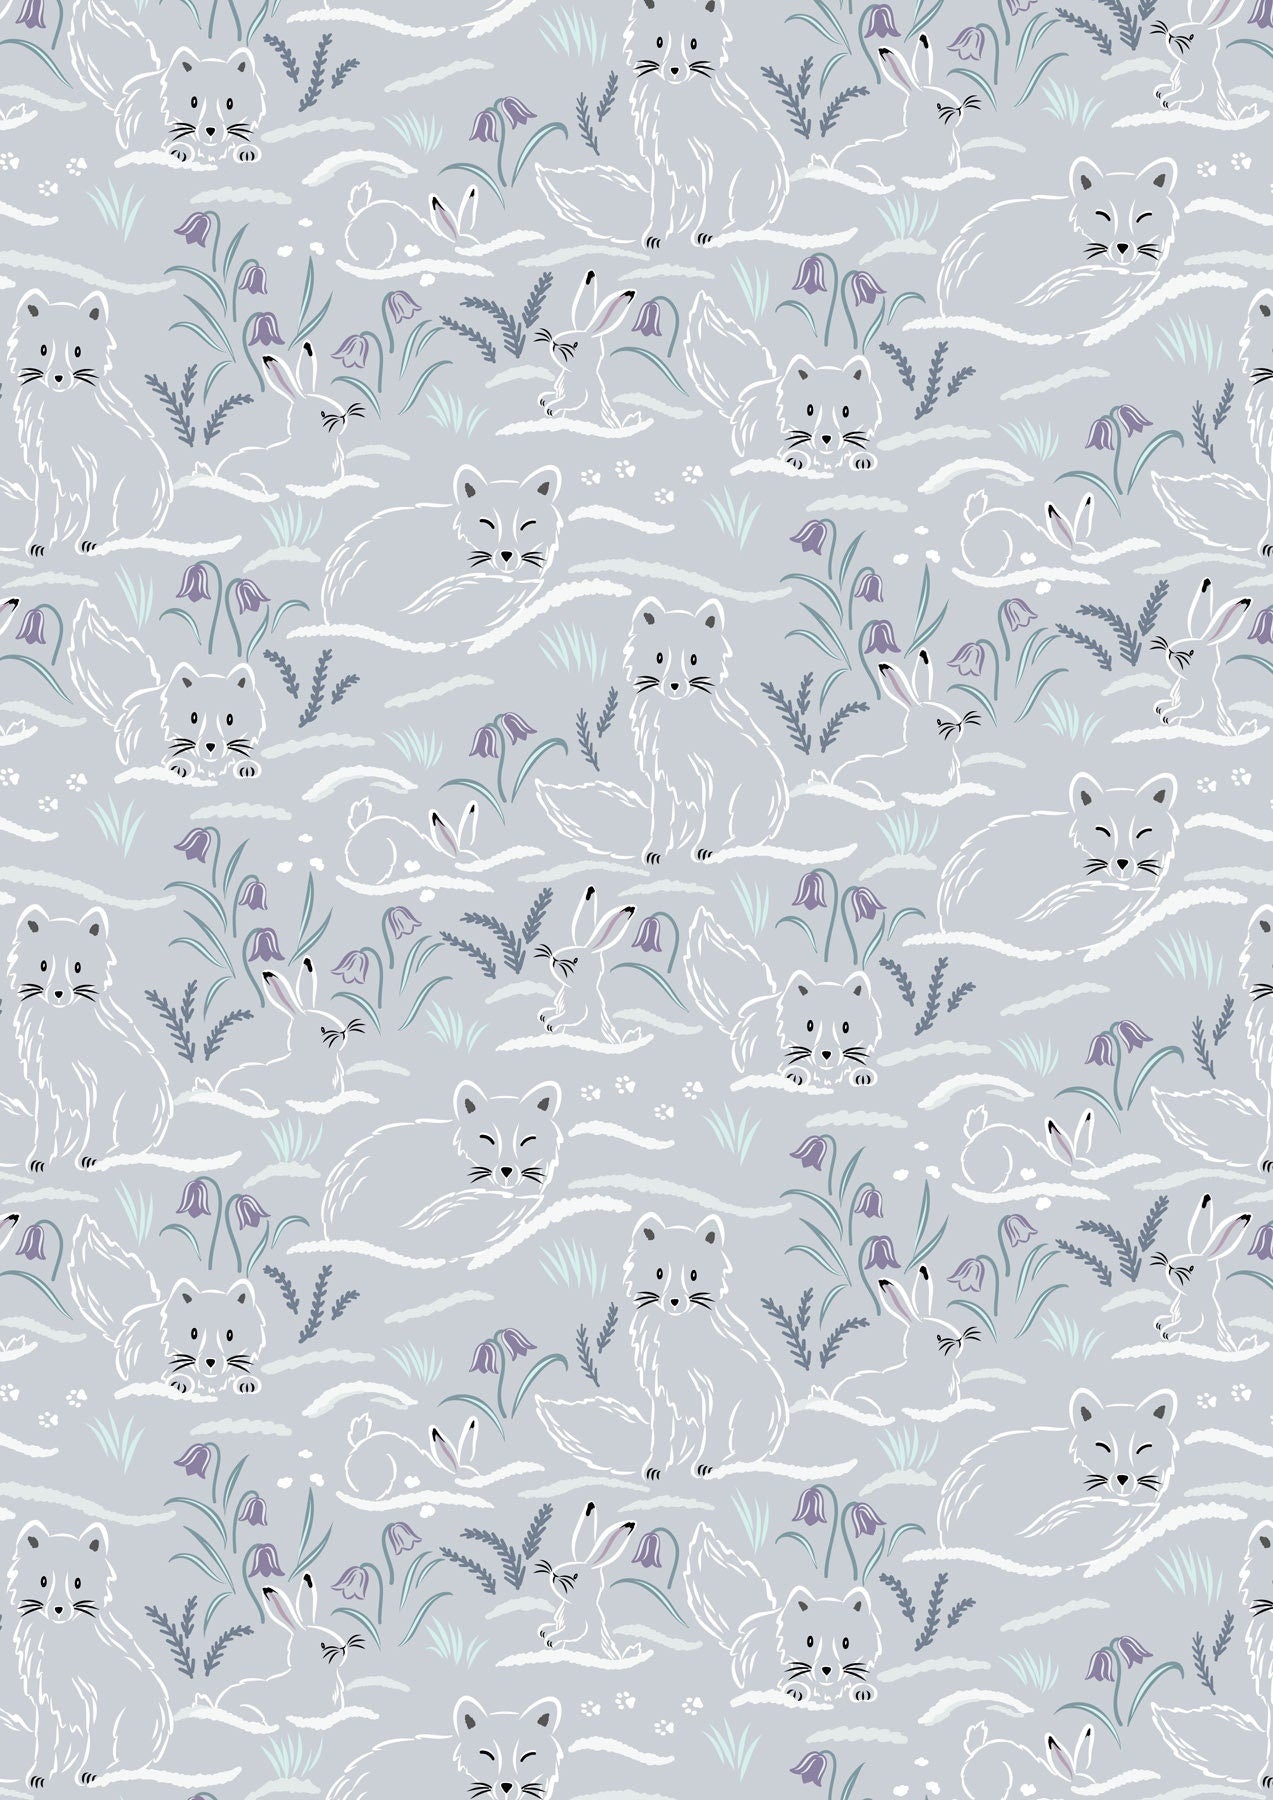 Arctic Fox and Rabbit Fabric - Haring Around on Grey - 100% Cotton - by Lewis & Irene - Winter Snow Animals - Snowshoe hare